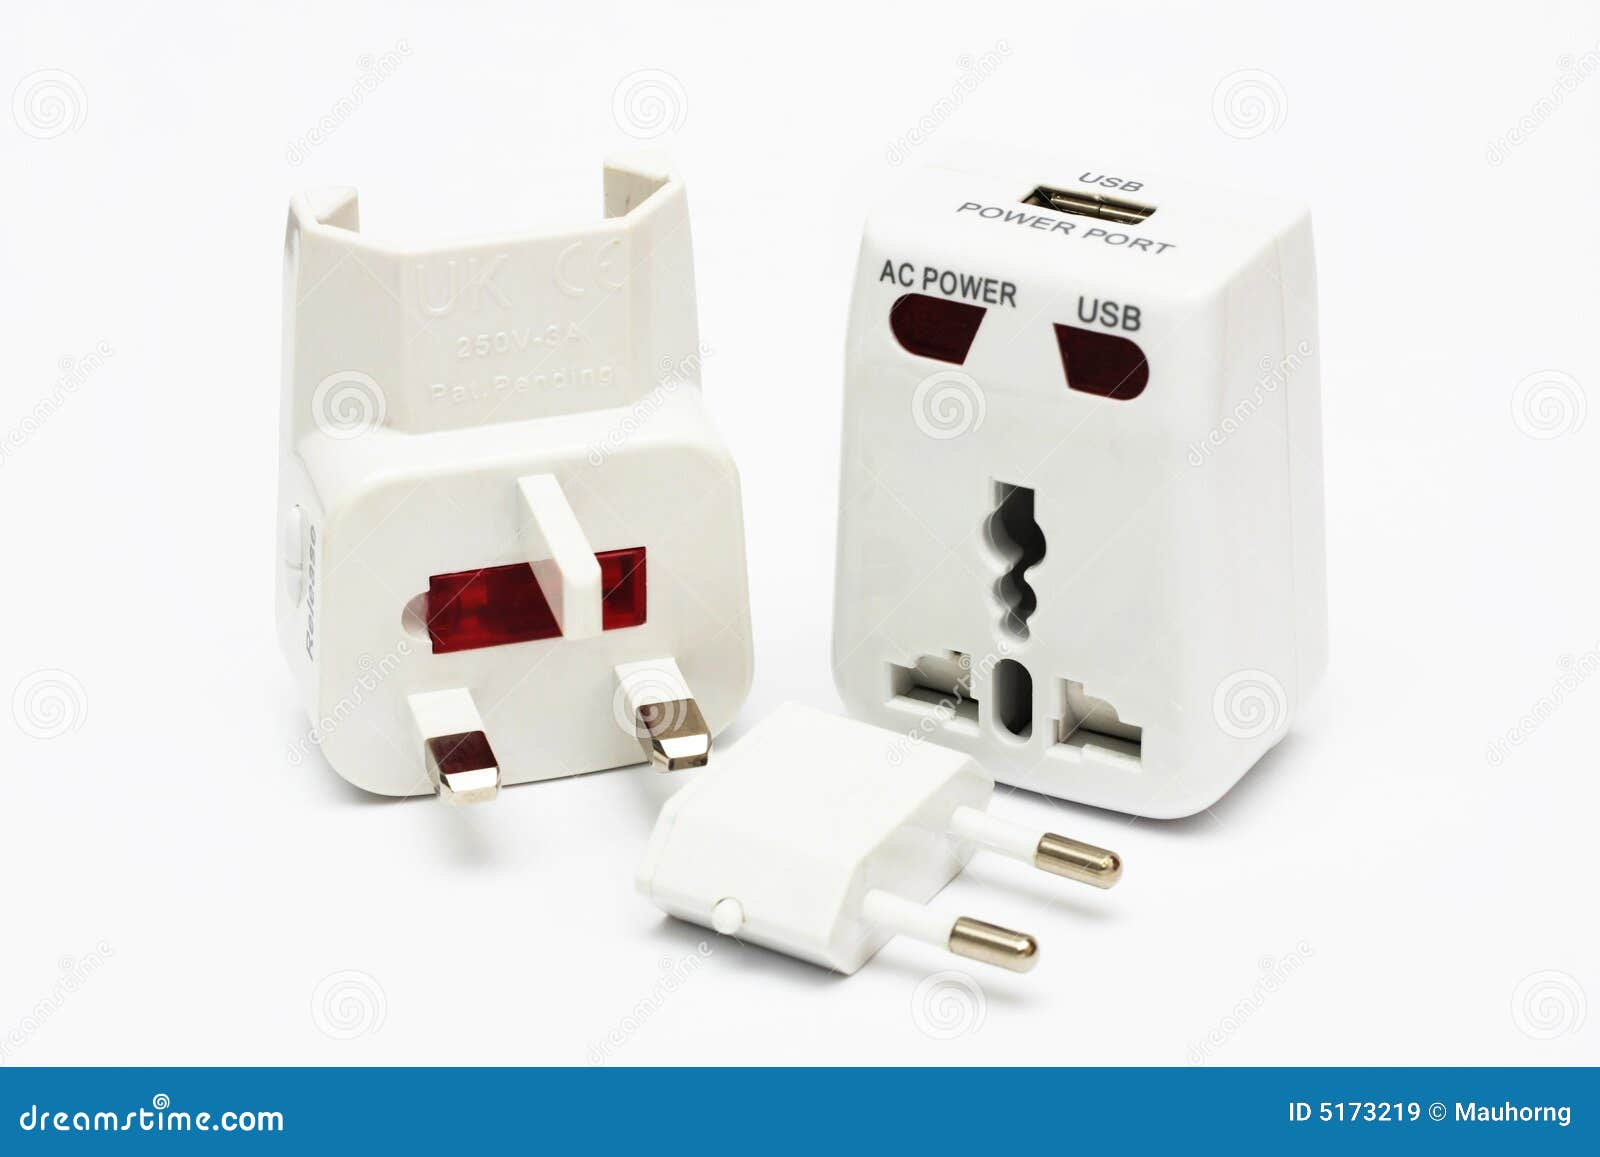 Universal Power Adapter stock image. Image of ampere, global - 5173219